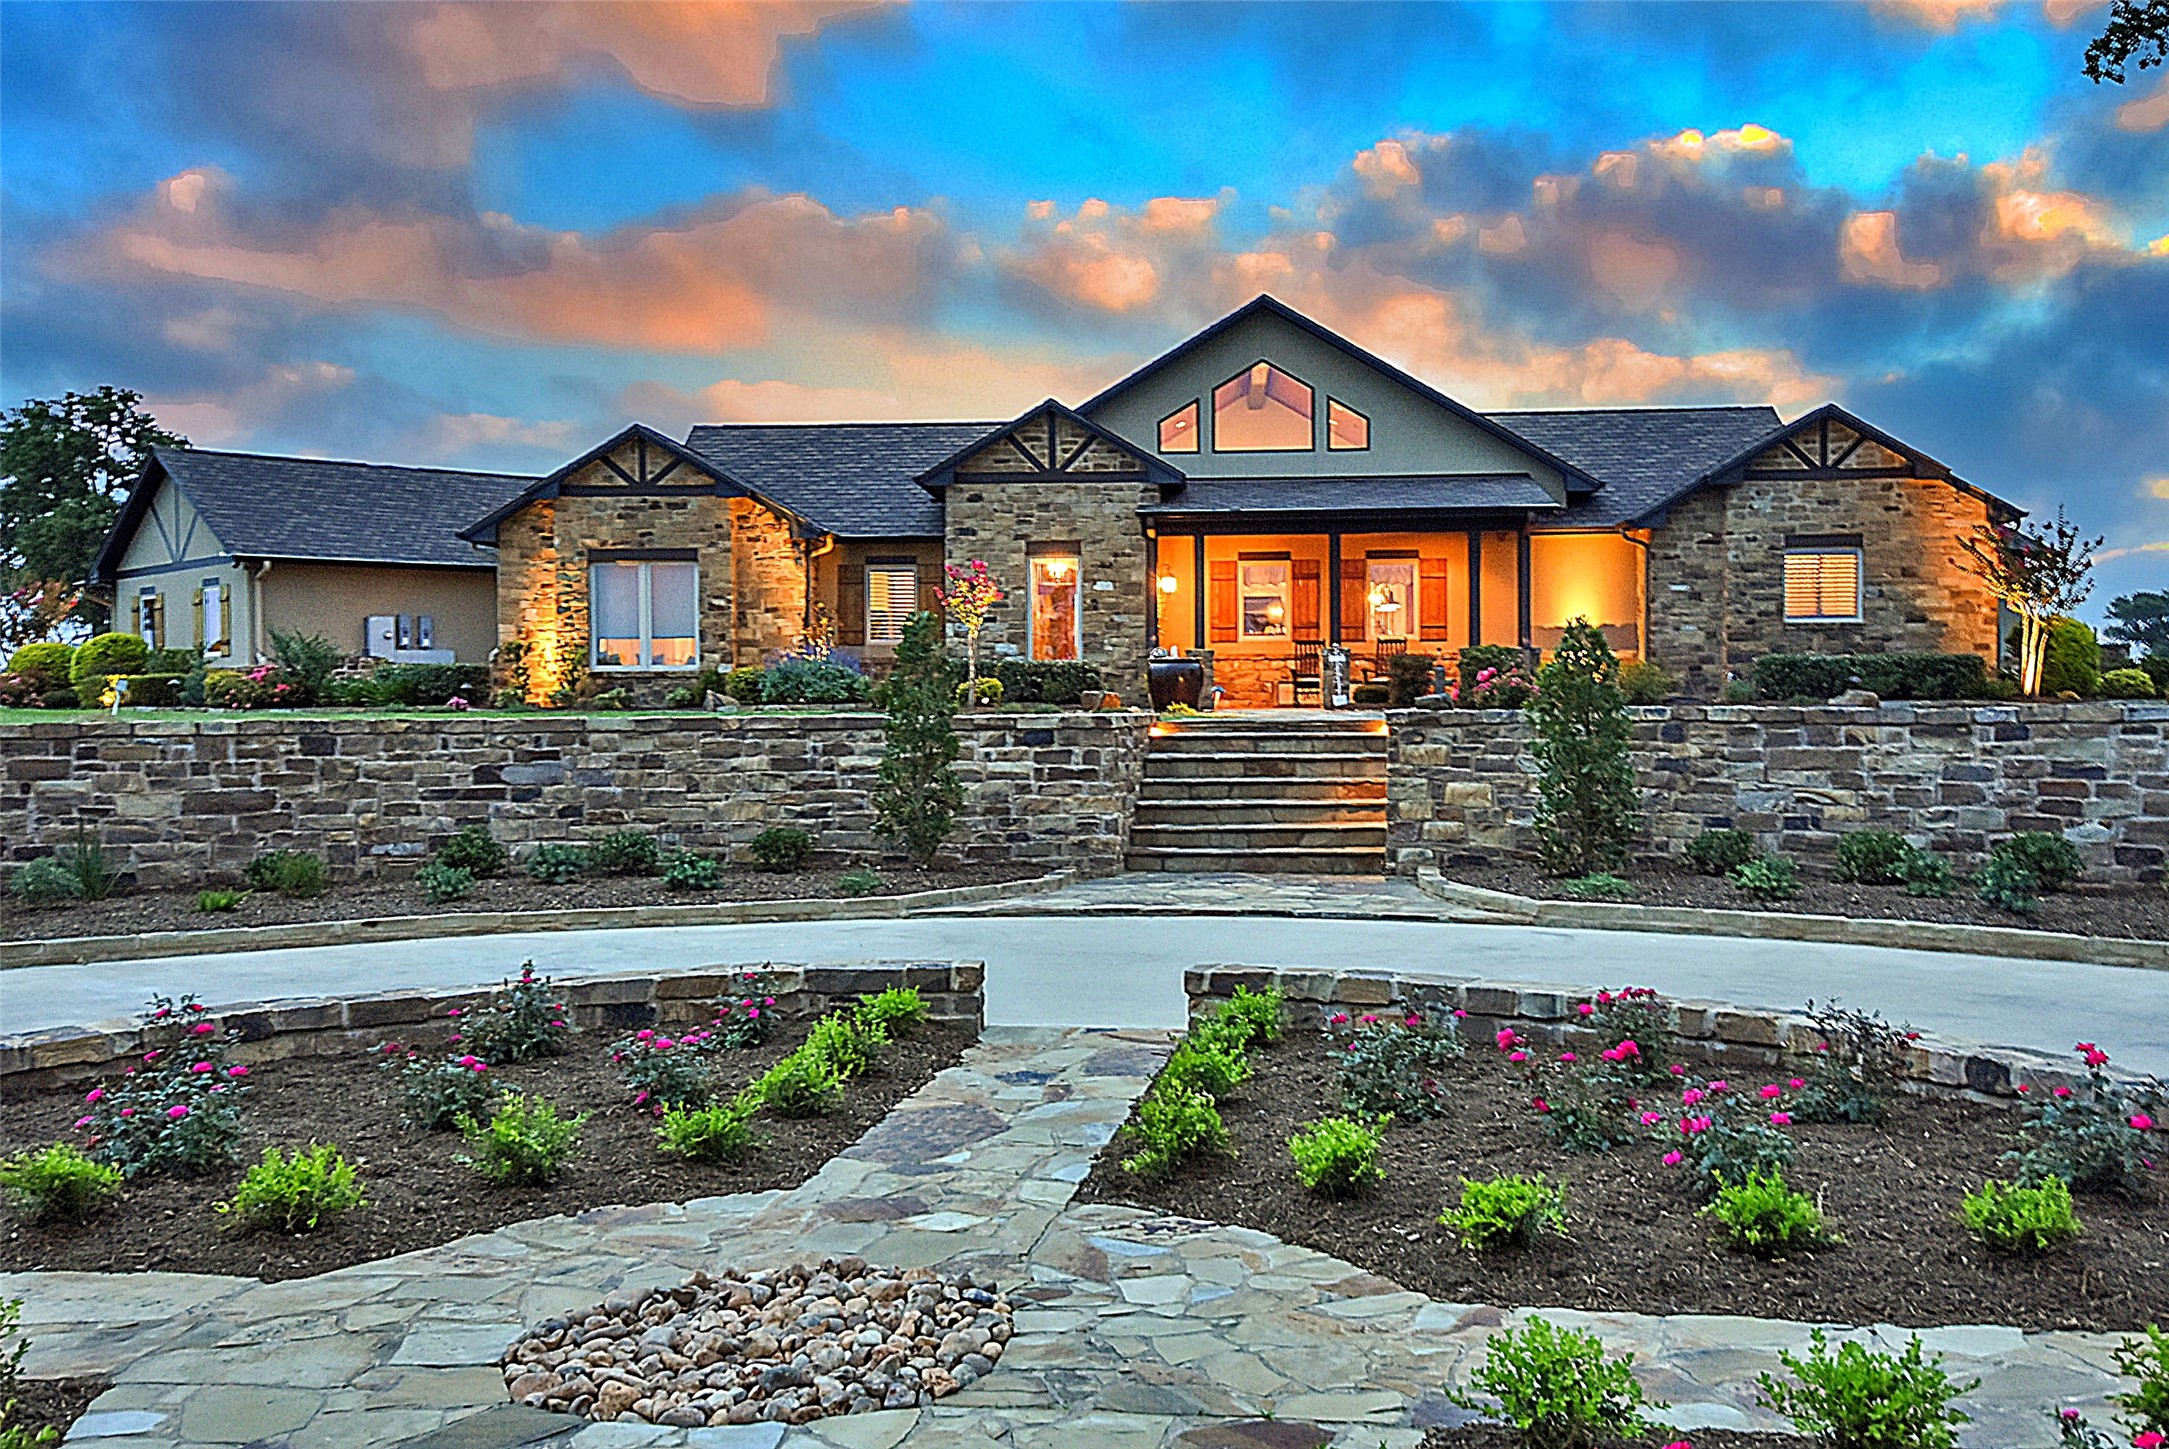 Absolutely gorgeous, is the best way to describe this home!